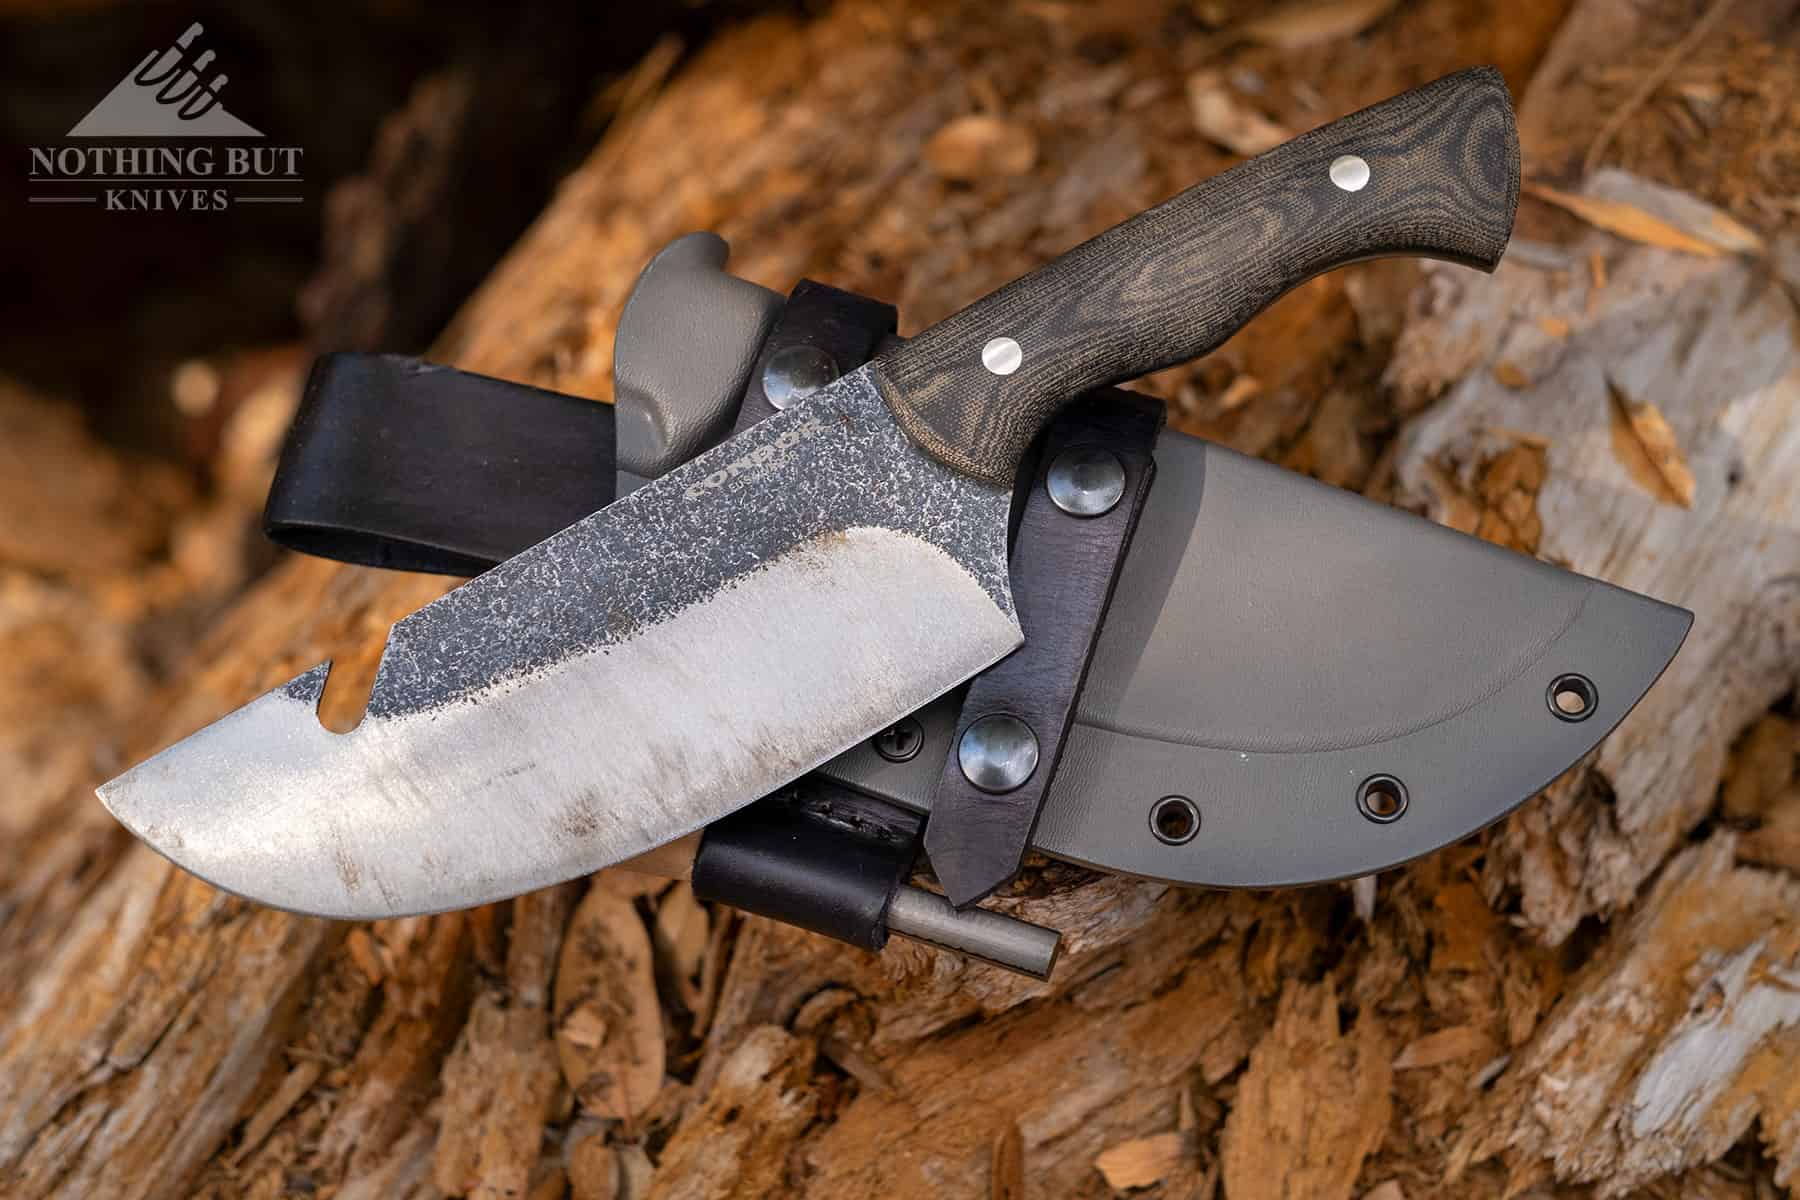 The Condor Bush Slicer shown with it's kydex sheath, so the viewer can see the differences from the Plan A Bowie.